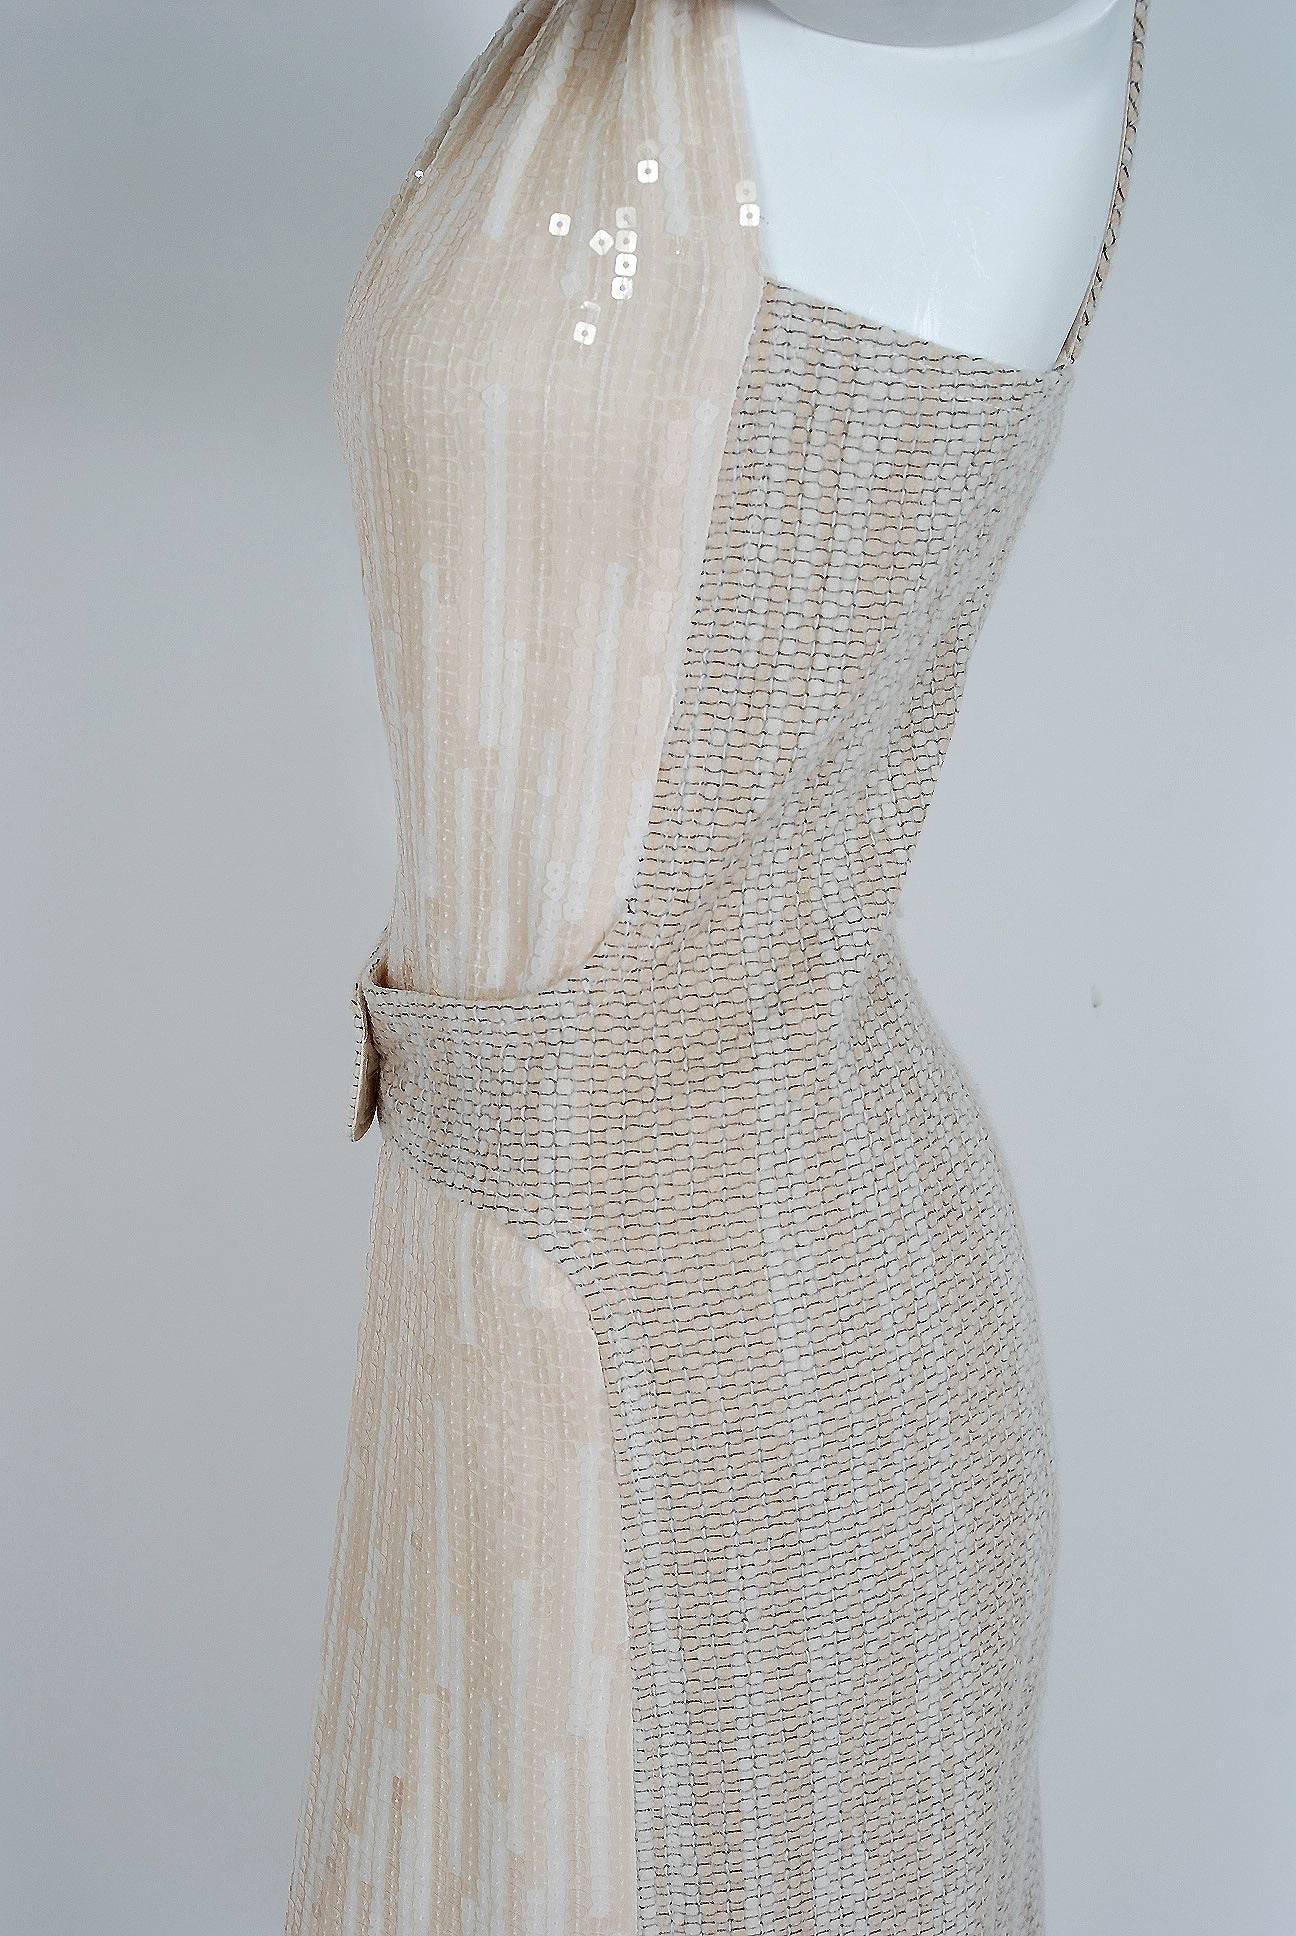 1991 Chanel Beige & Ivory Sequin Textured Wool Sleeveless Dress Gown & Shawl 2